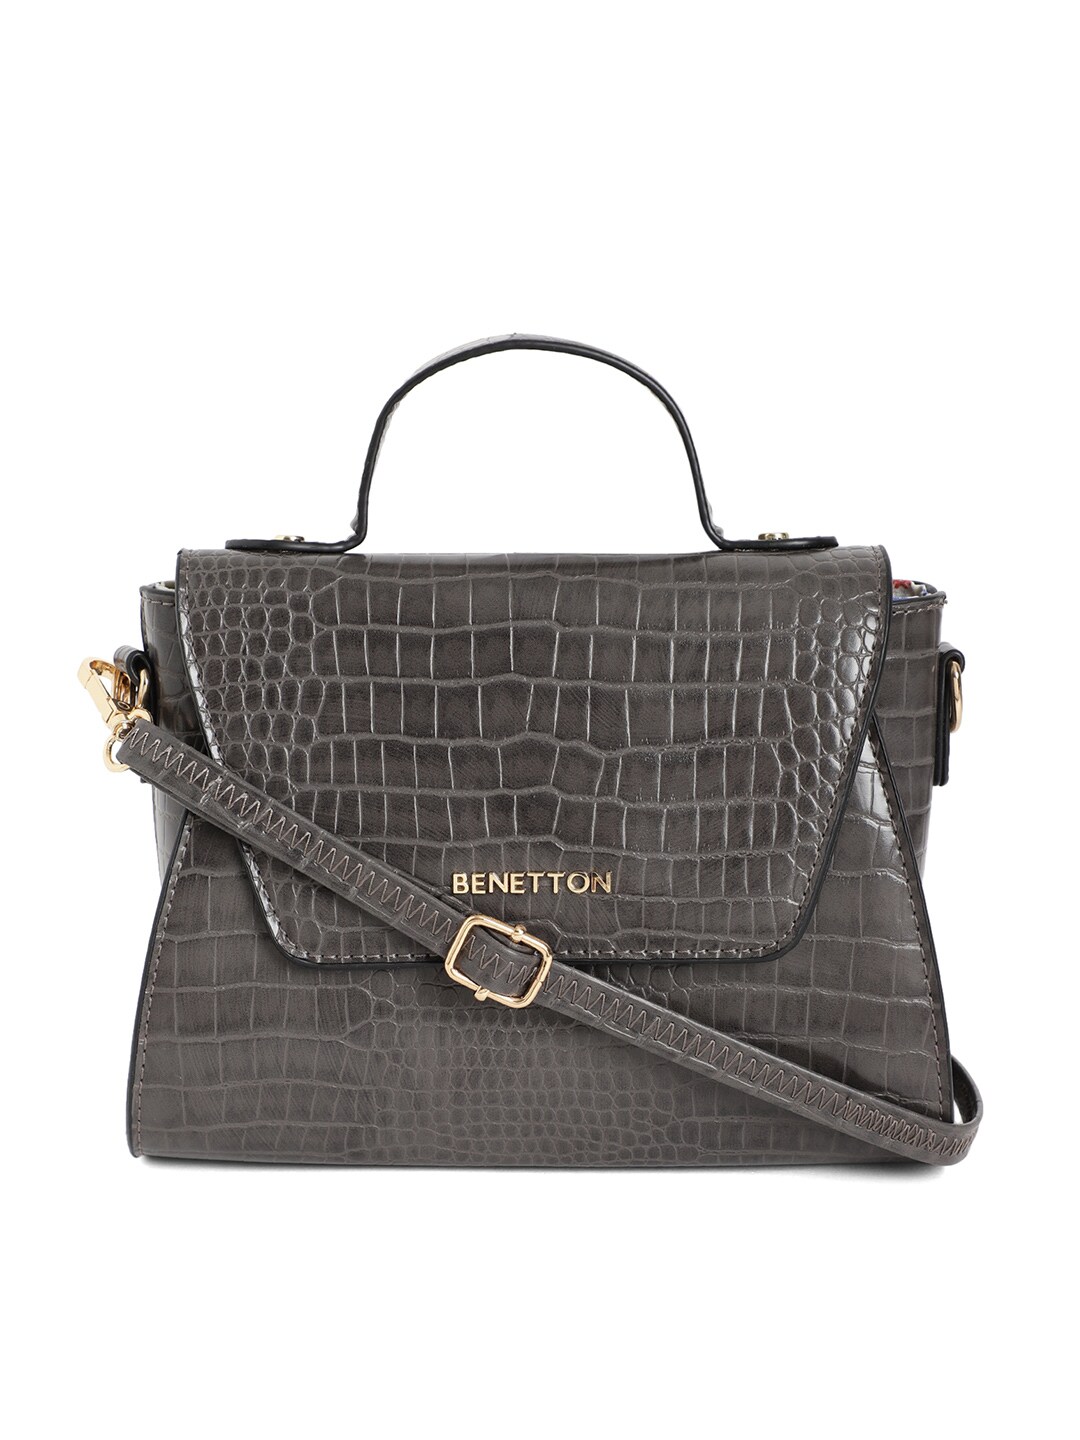 United Colors of Benetton Grey Animal Printed Structured Satchel Price in India